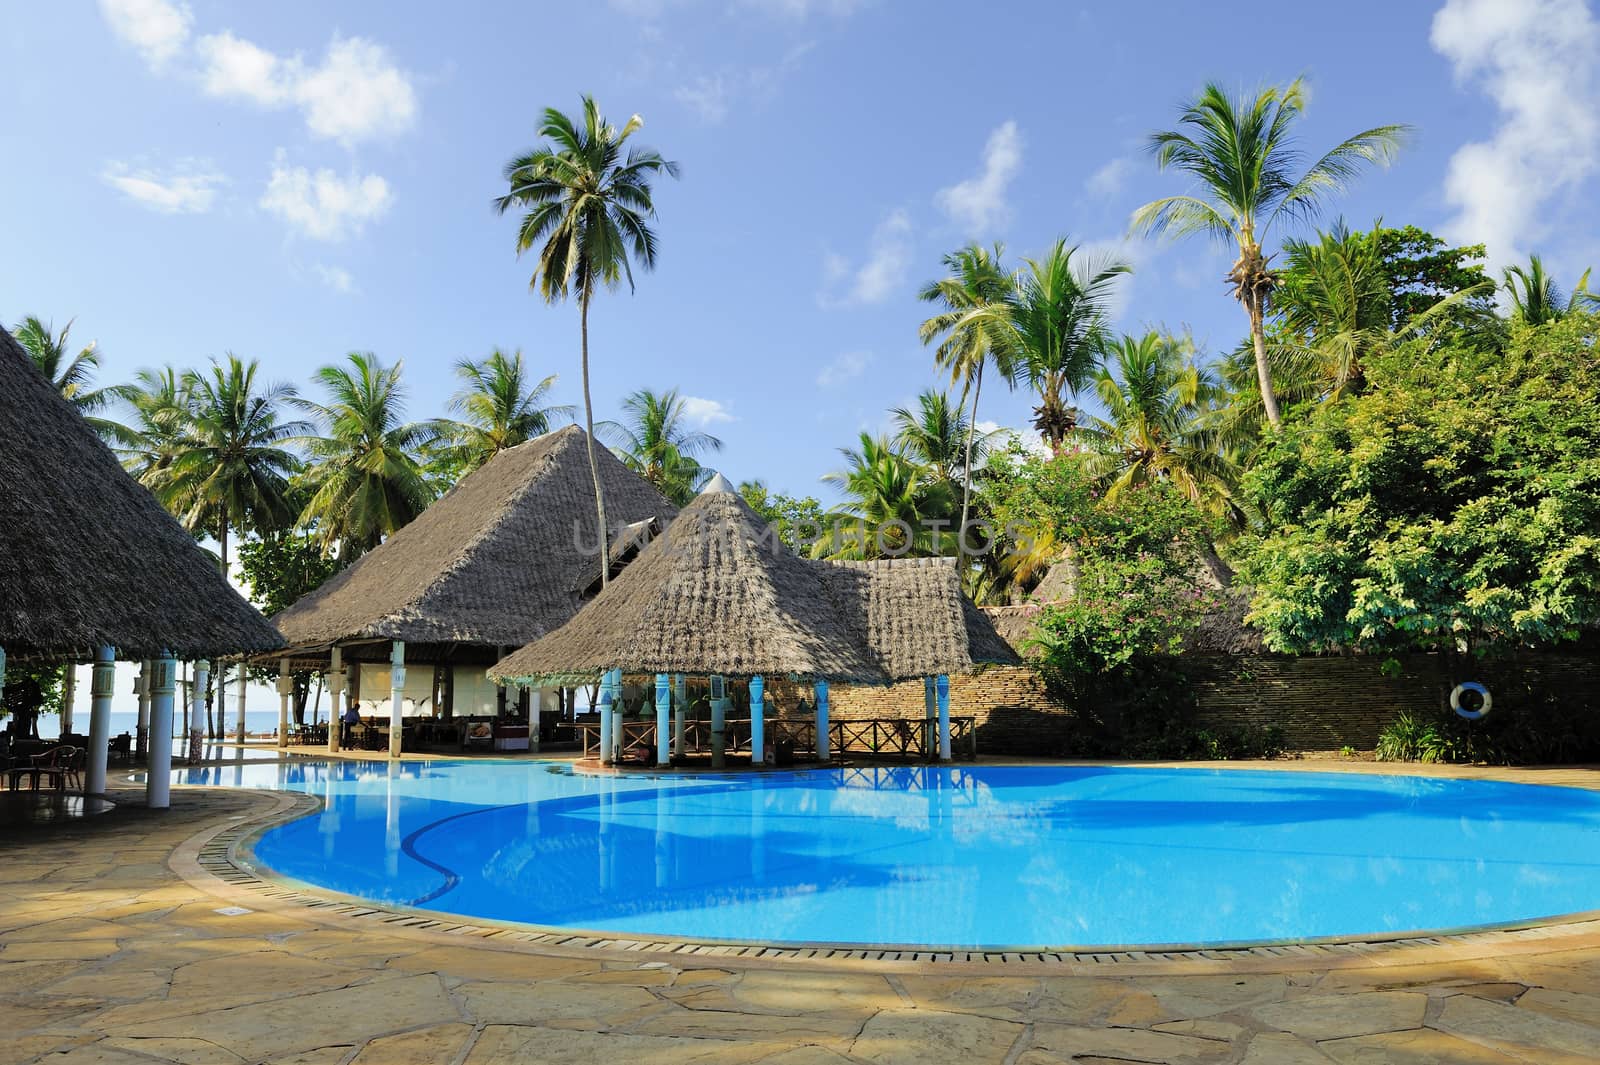 Luxury hotel with swimming pool and palm